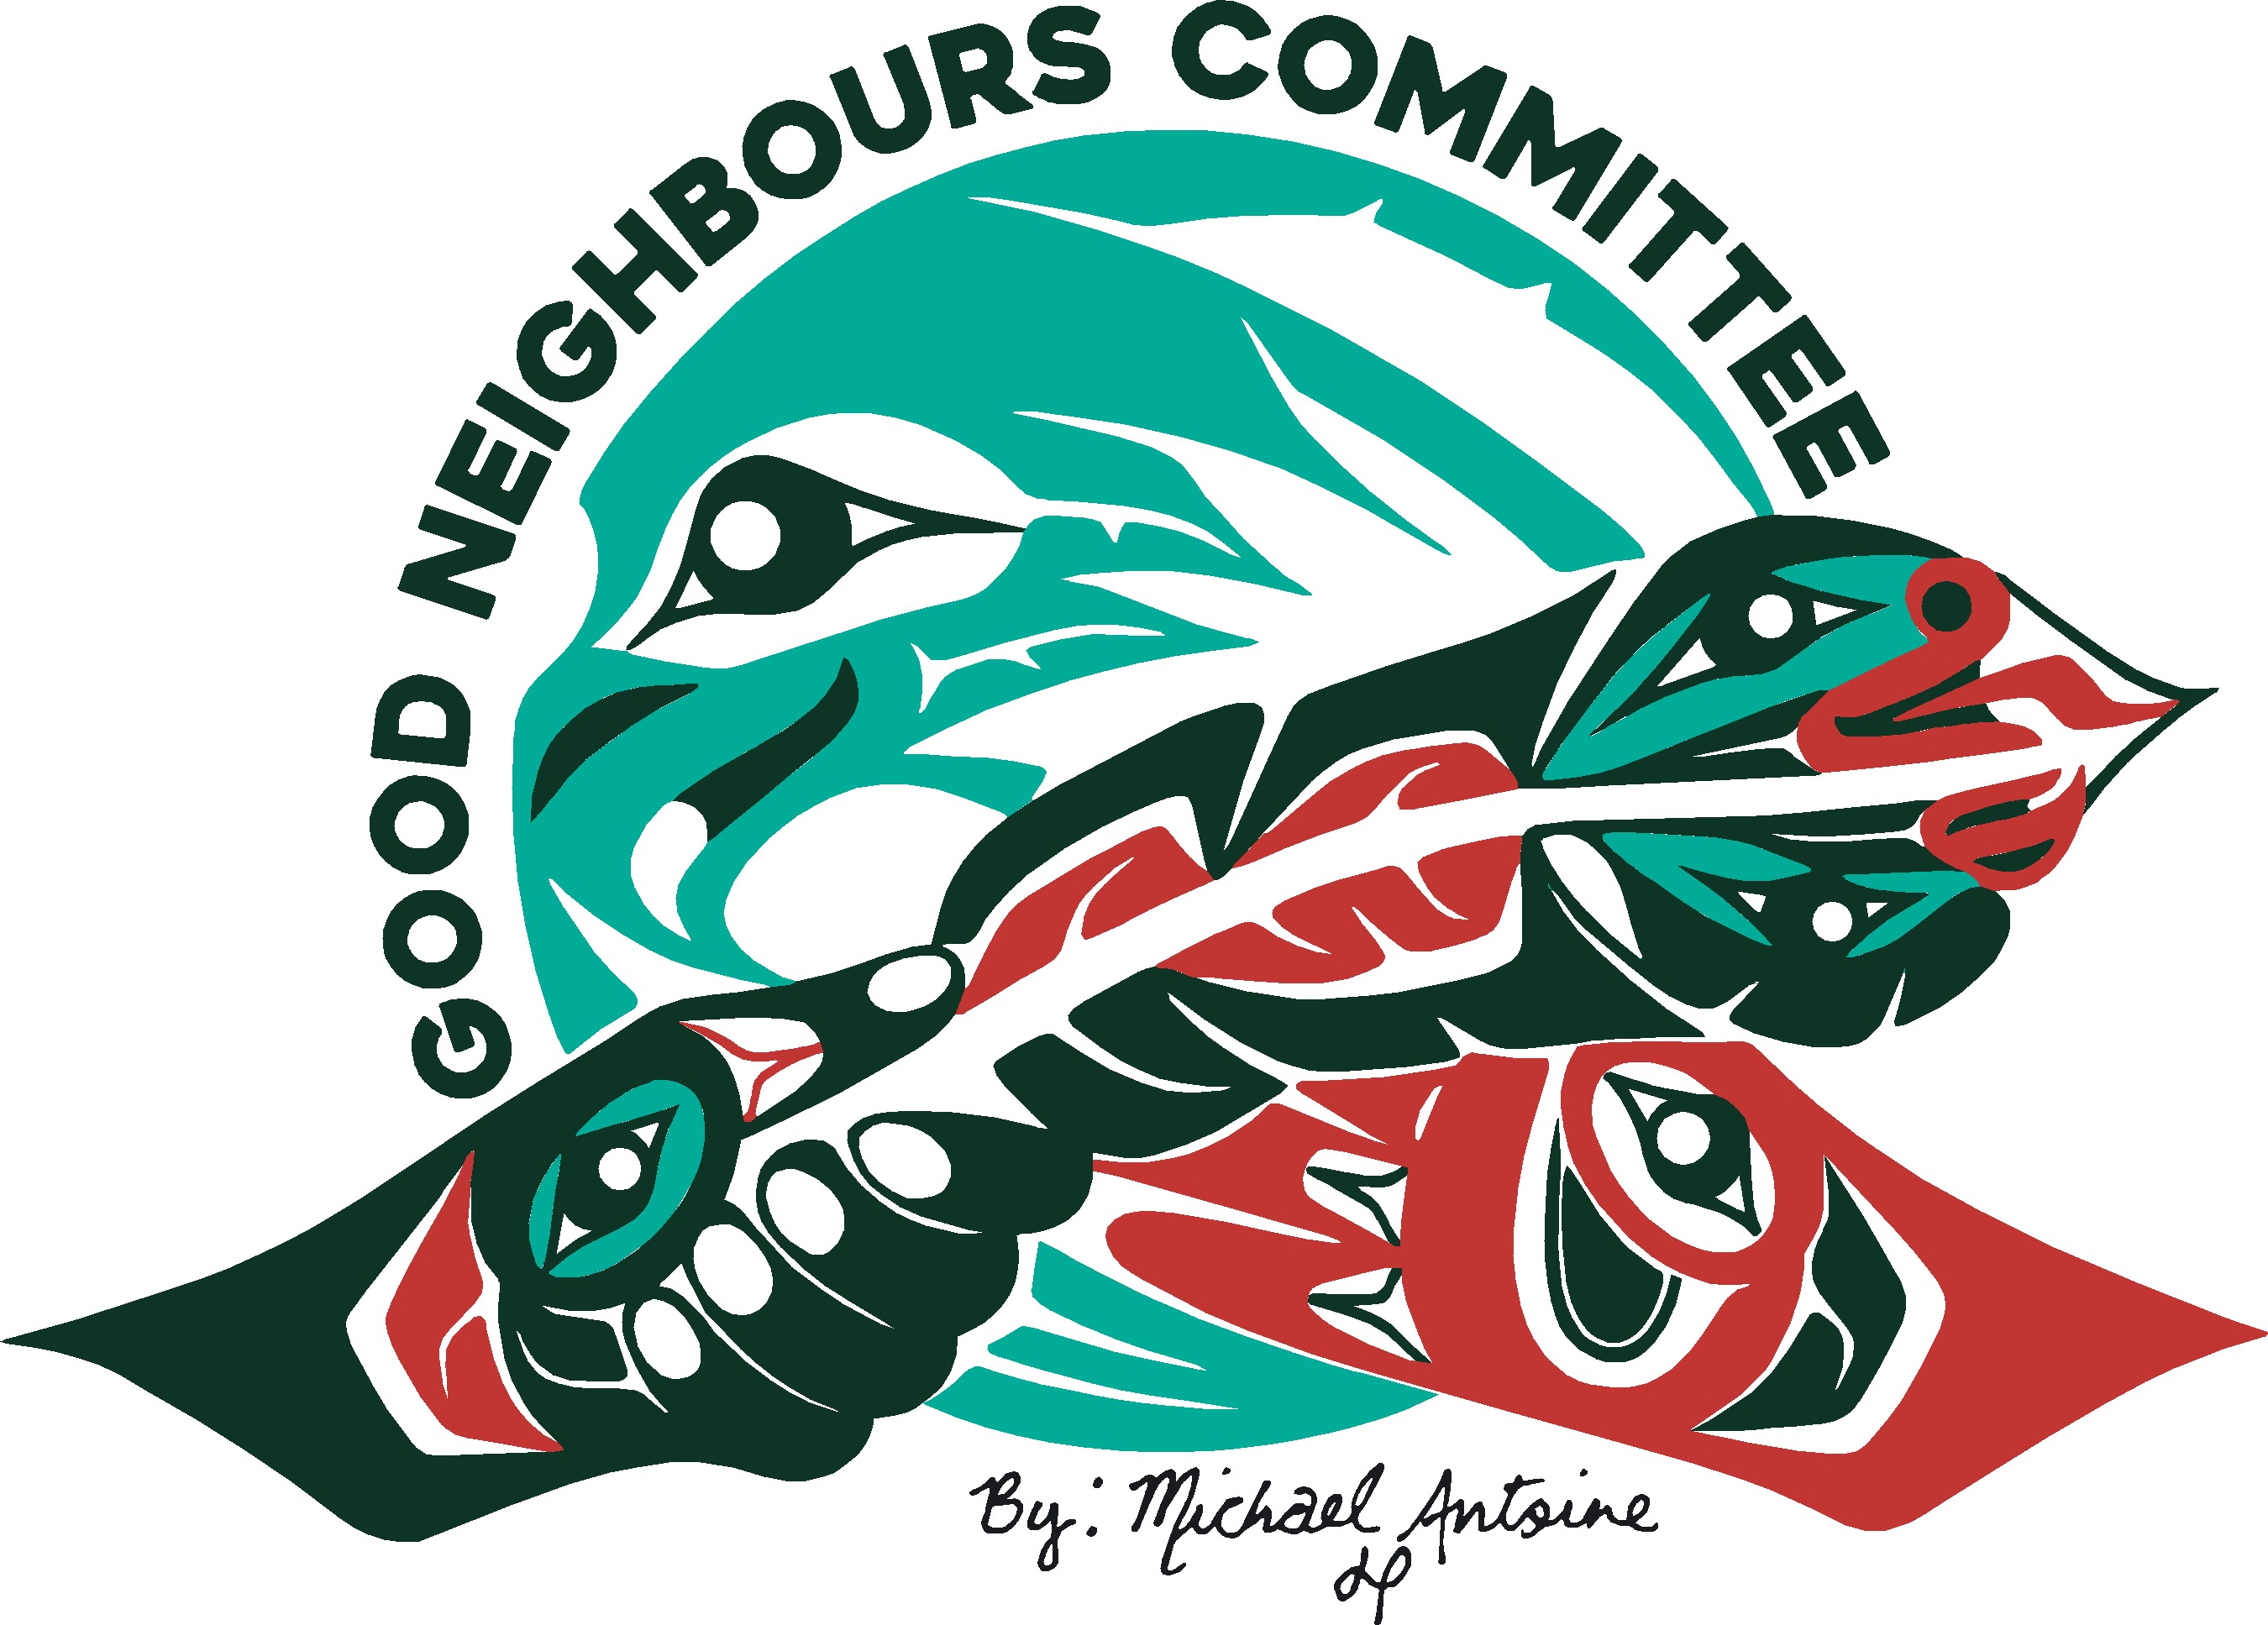 Welcome to the Good Neighbours Committee webpage